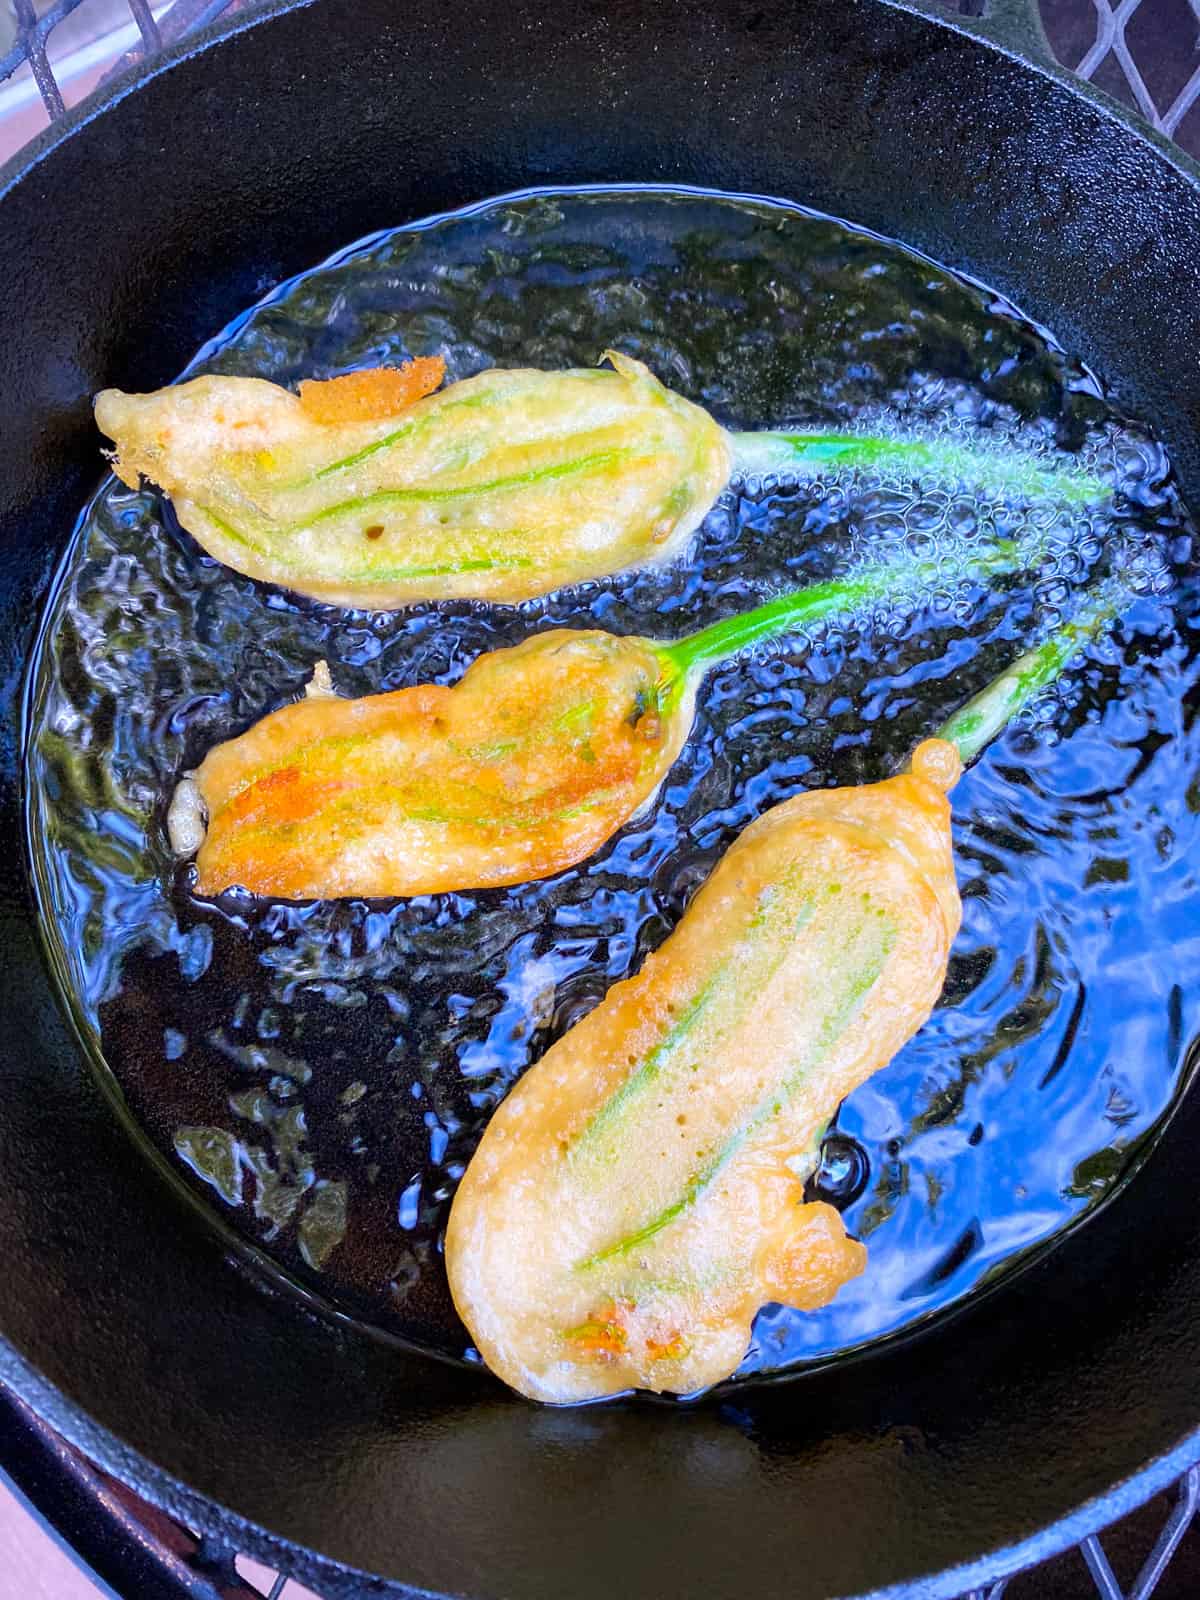 Fry the zucchini flowers in hot oil until golden brown.